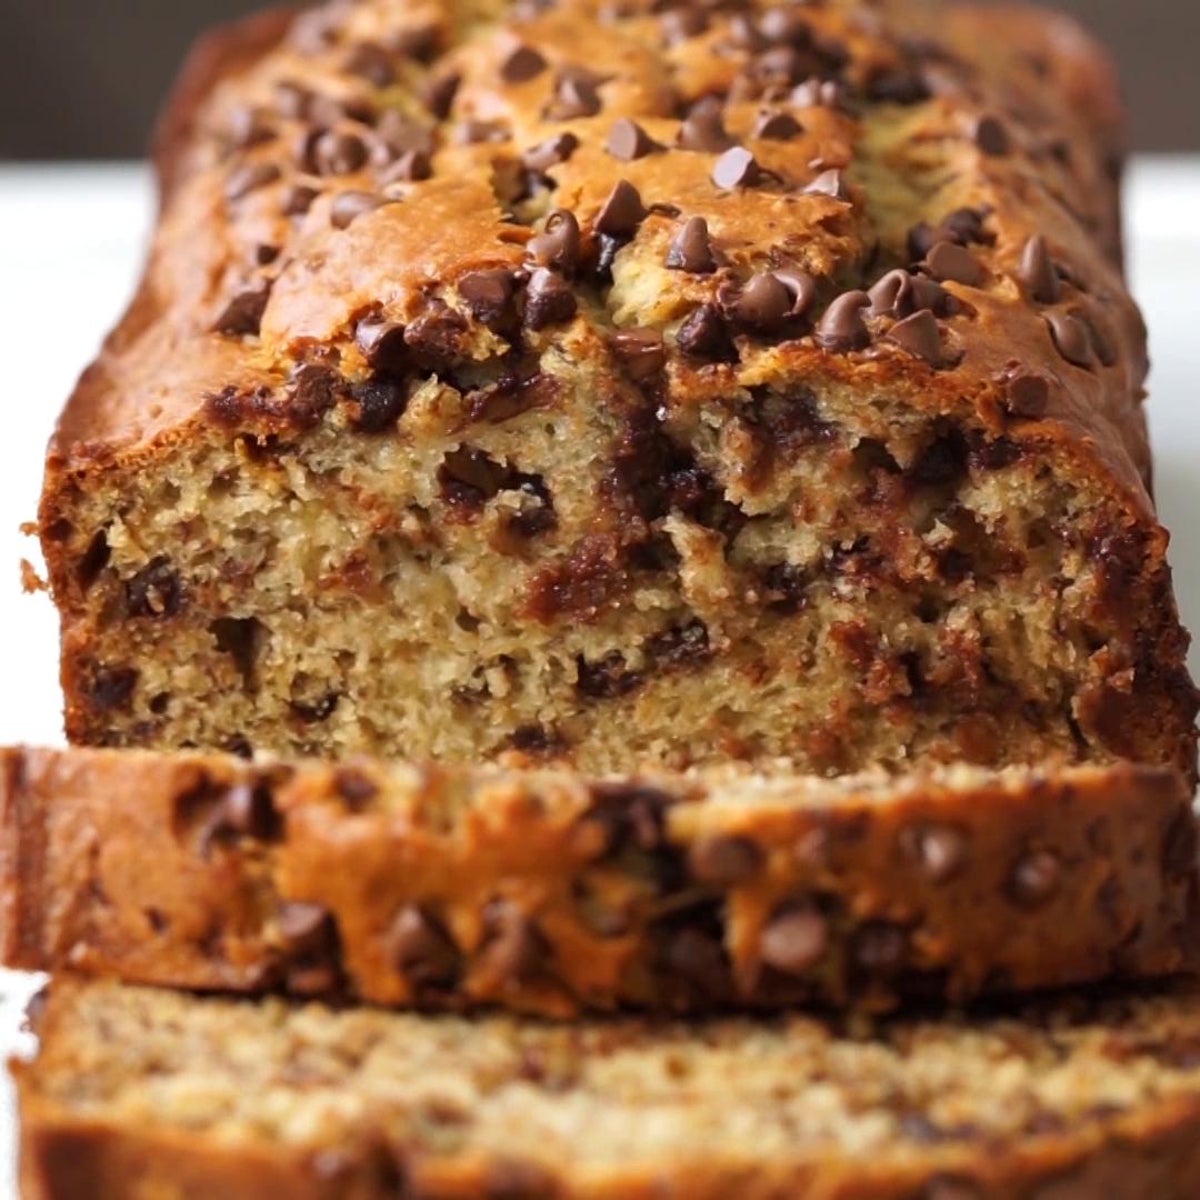 Small Loaf Banana Bread Offers Discounts, Save 70% | jlcatj.gob.mx